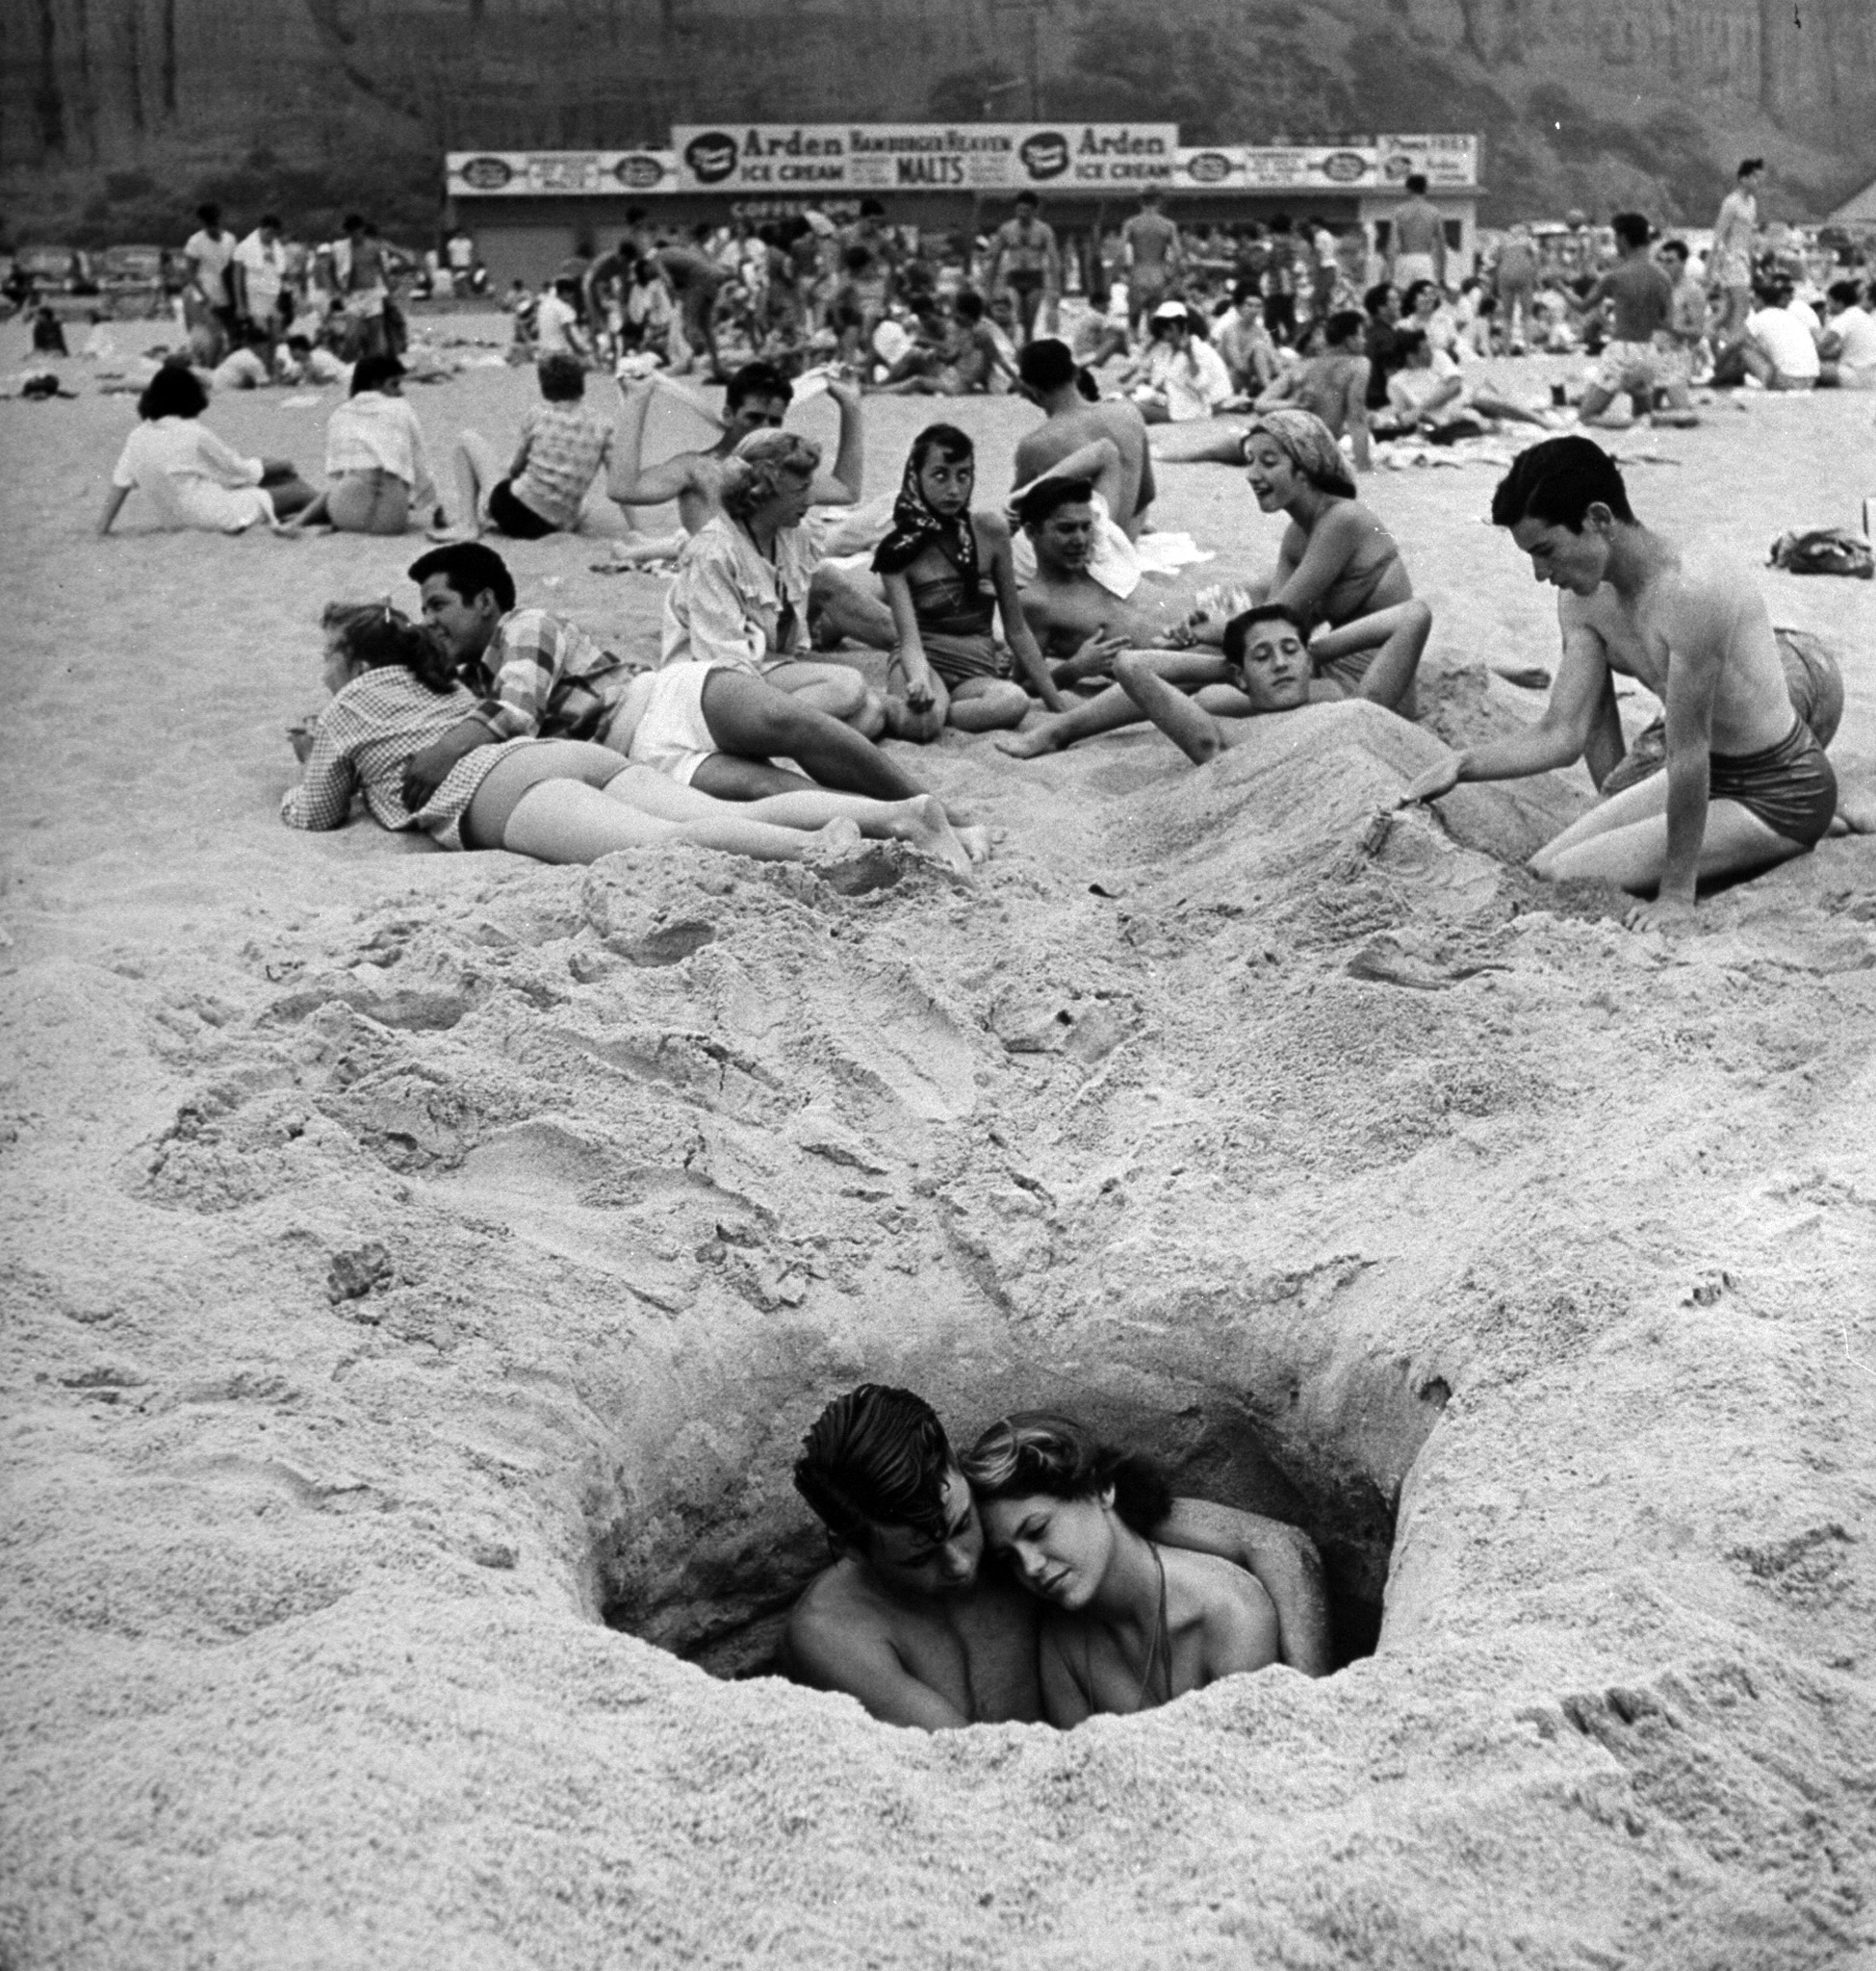 Young couple cuddling as they sit down in a hole in the sand while others lie around behind them on a hot Independence Day at the beach, 1950.